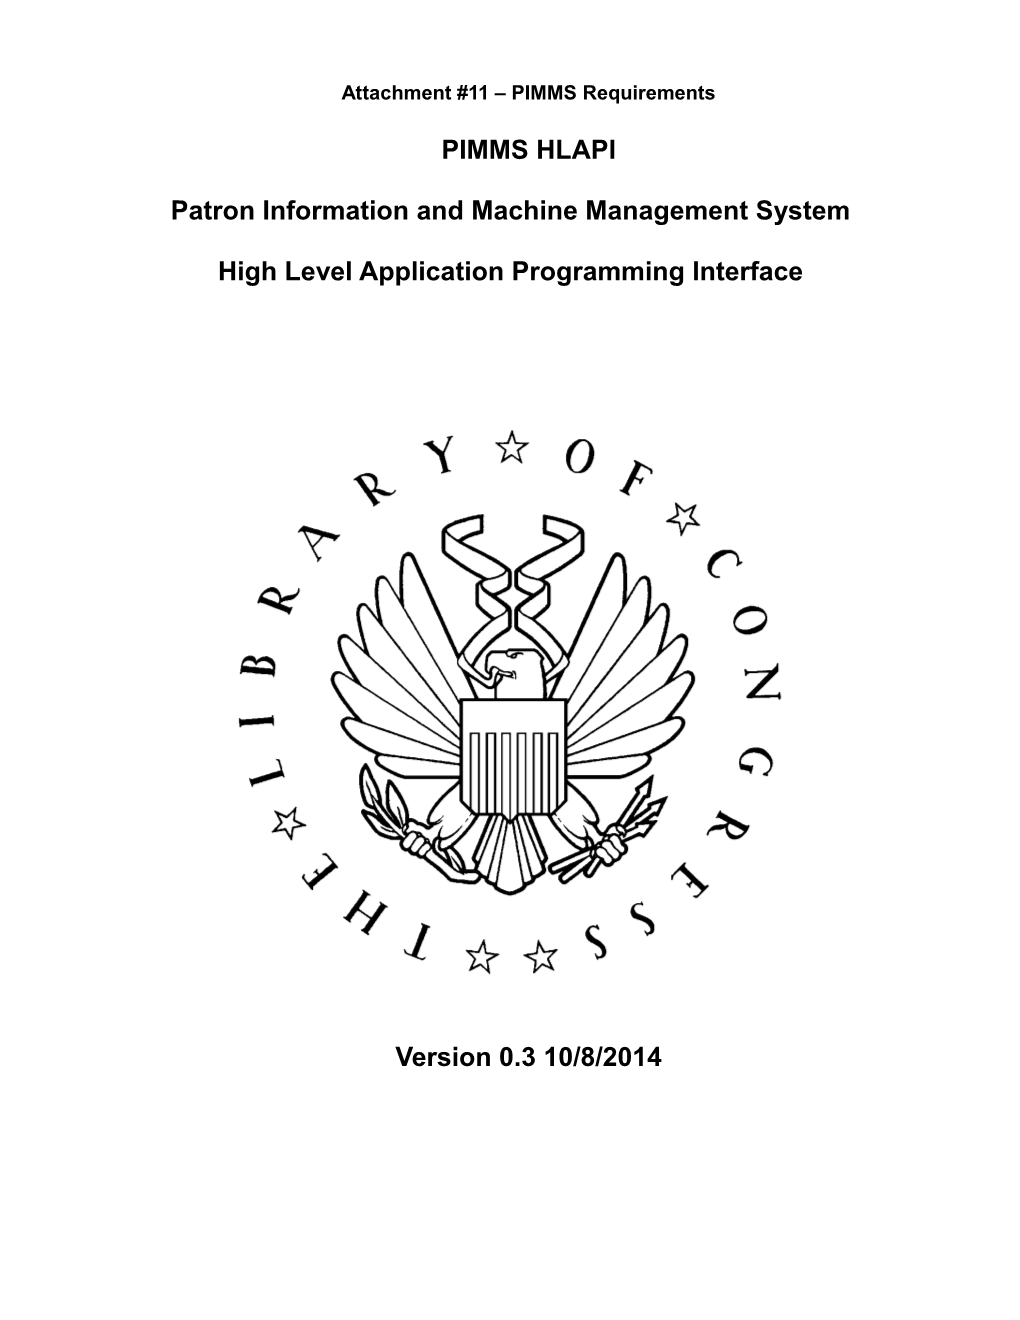 Patron Information and Machine Management System